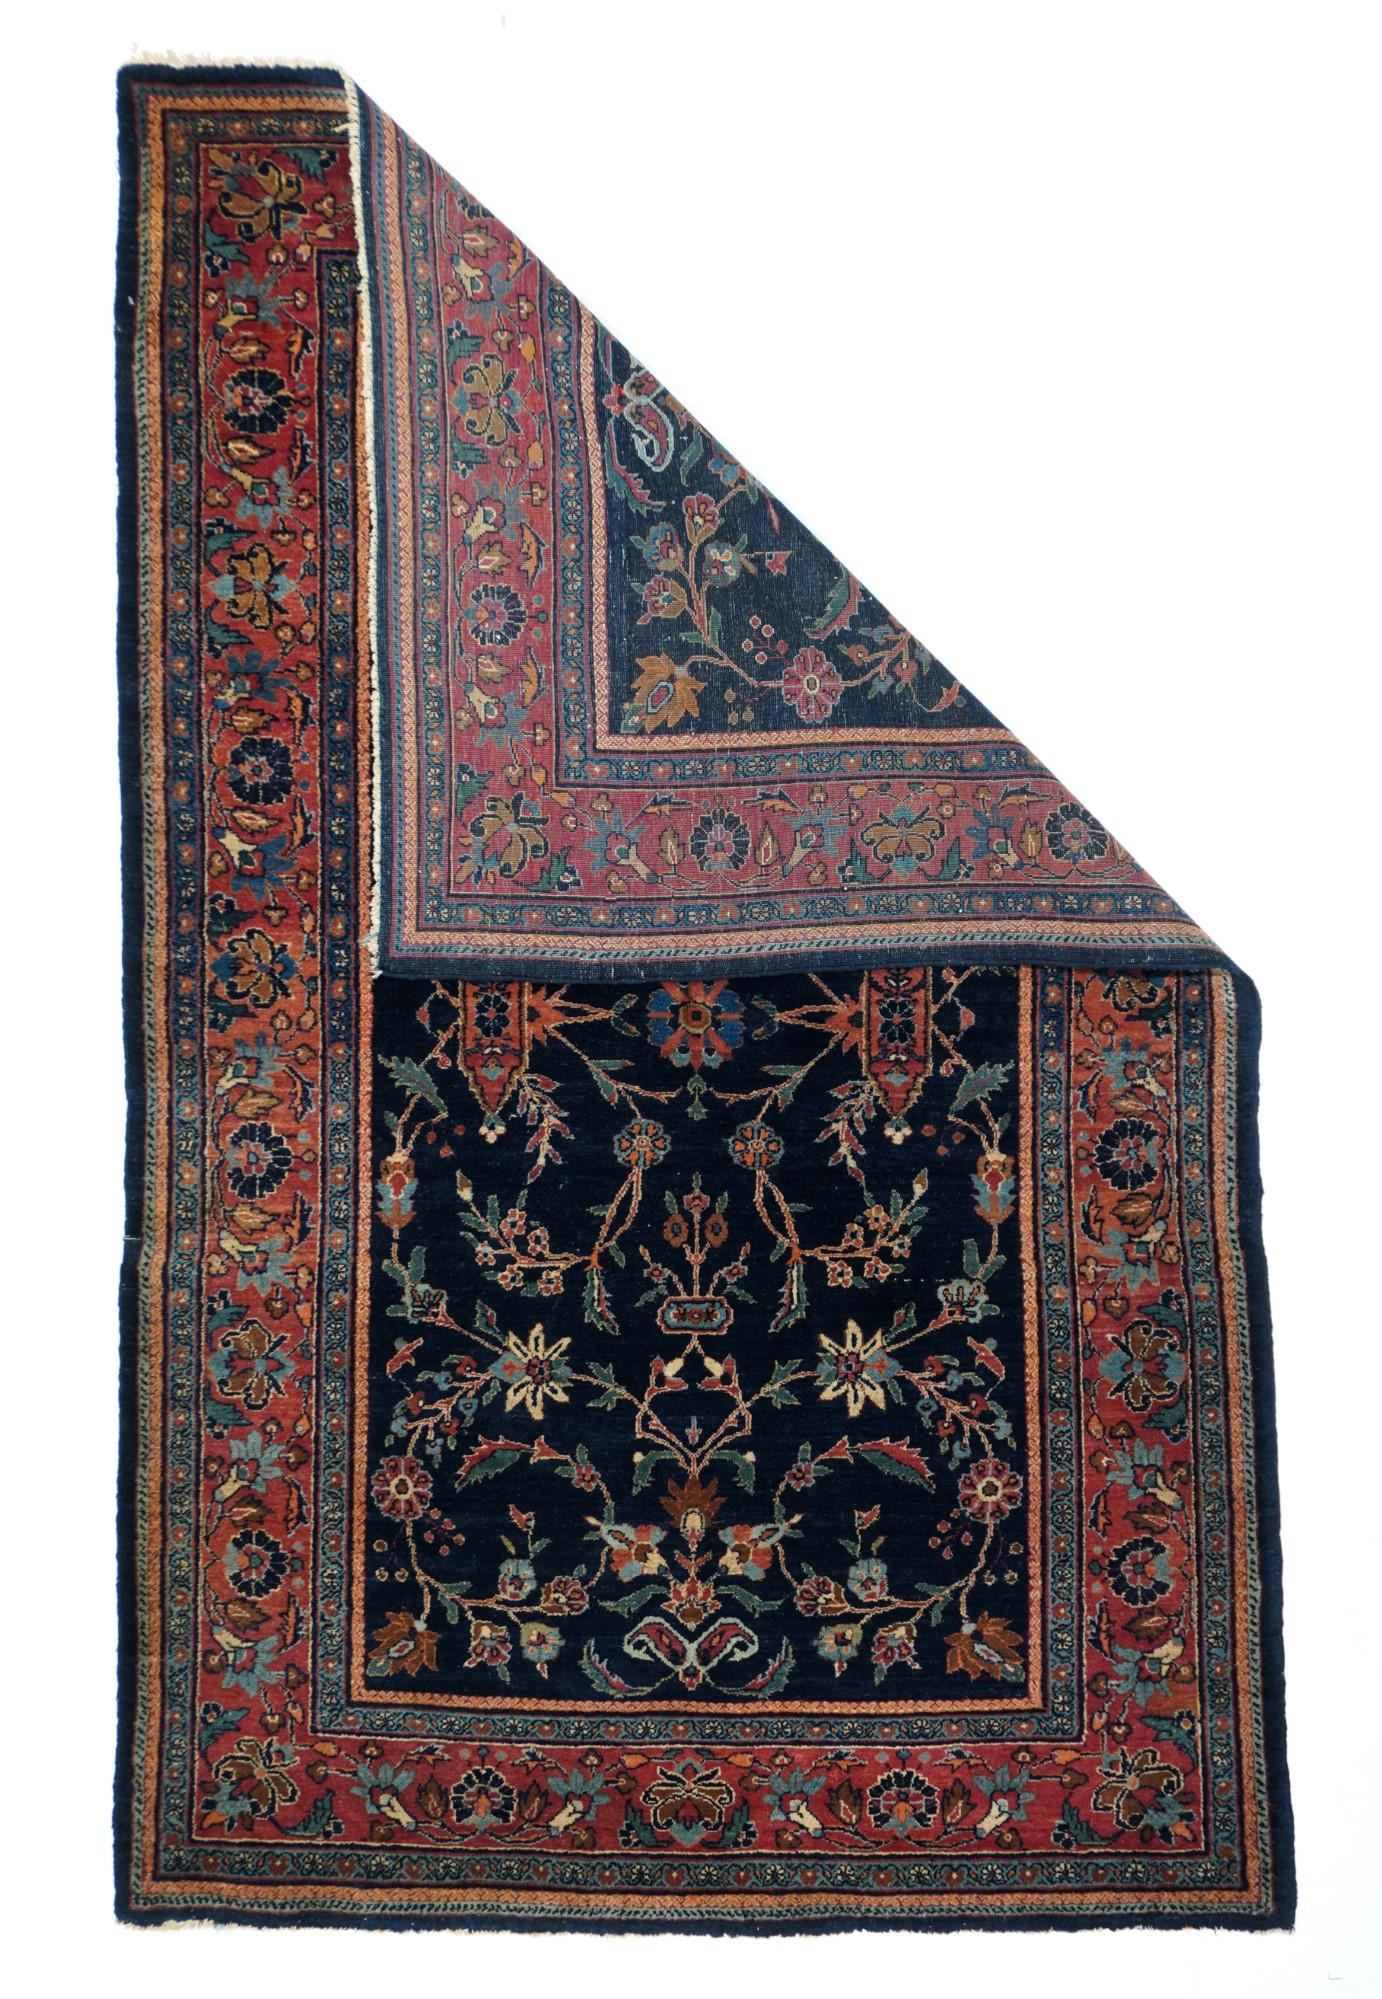 The navy indigo-sourced ground of this centralized pattern west Persian Kurdish urban scatter shows a small focal rosette surrounded by vines, cartouches, saz leaves, and lesser rosettes, all within an abrashed red-rose border of vinery and